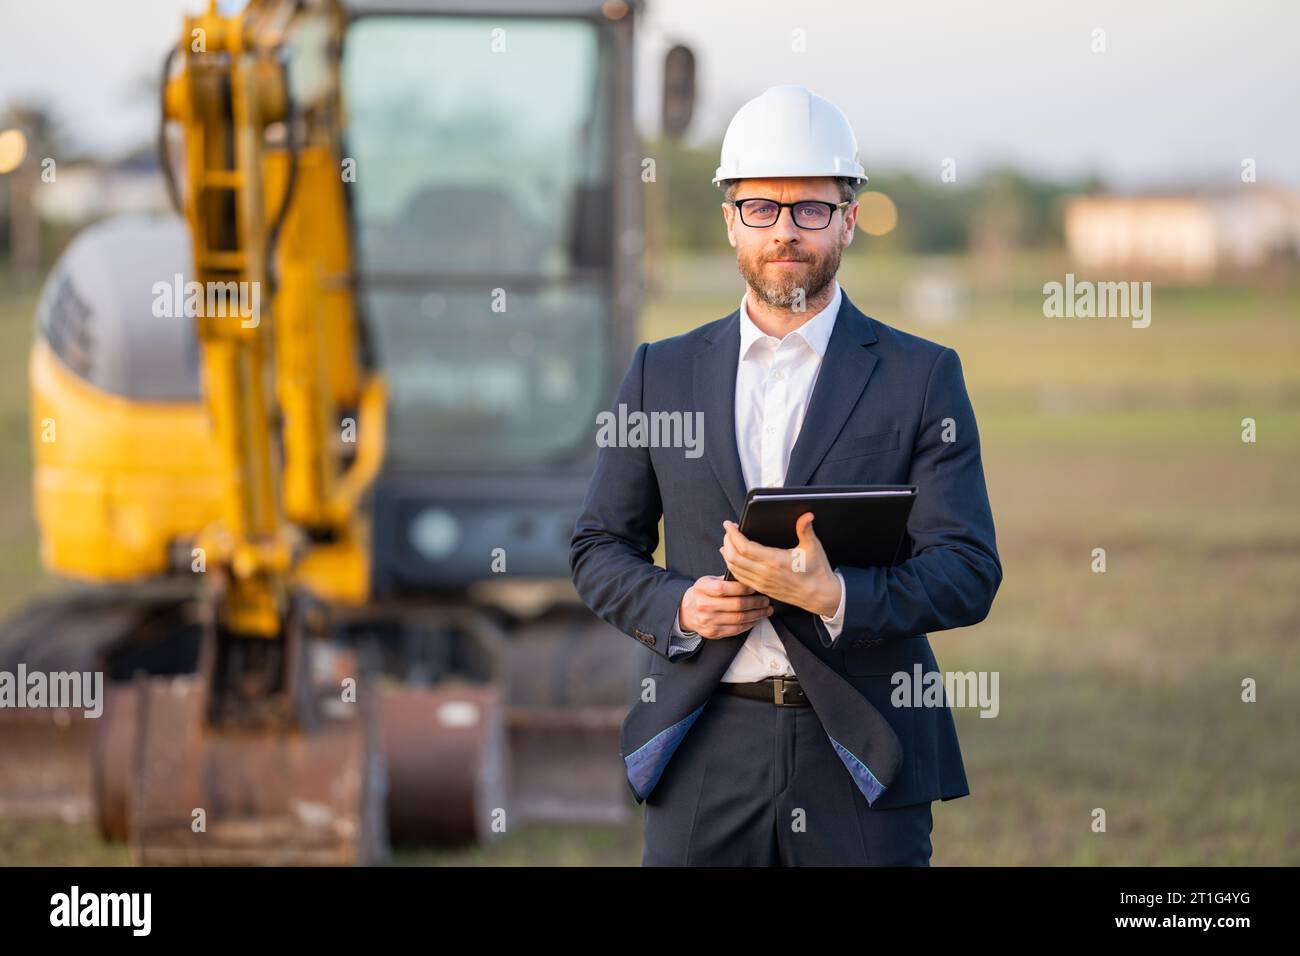 Civil engineer worker at a construction site. Engineer man in front of house background. Confident engineer worker at modern home building constructio Stock Photo